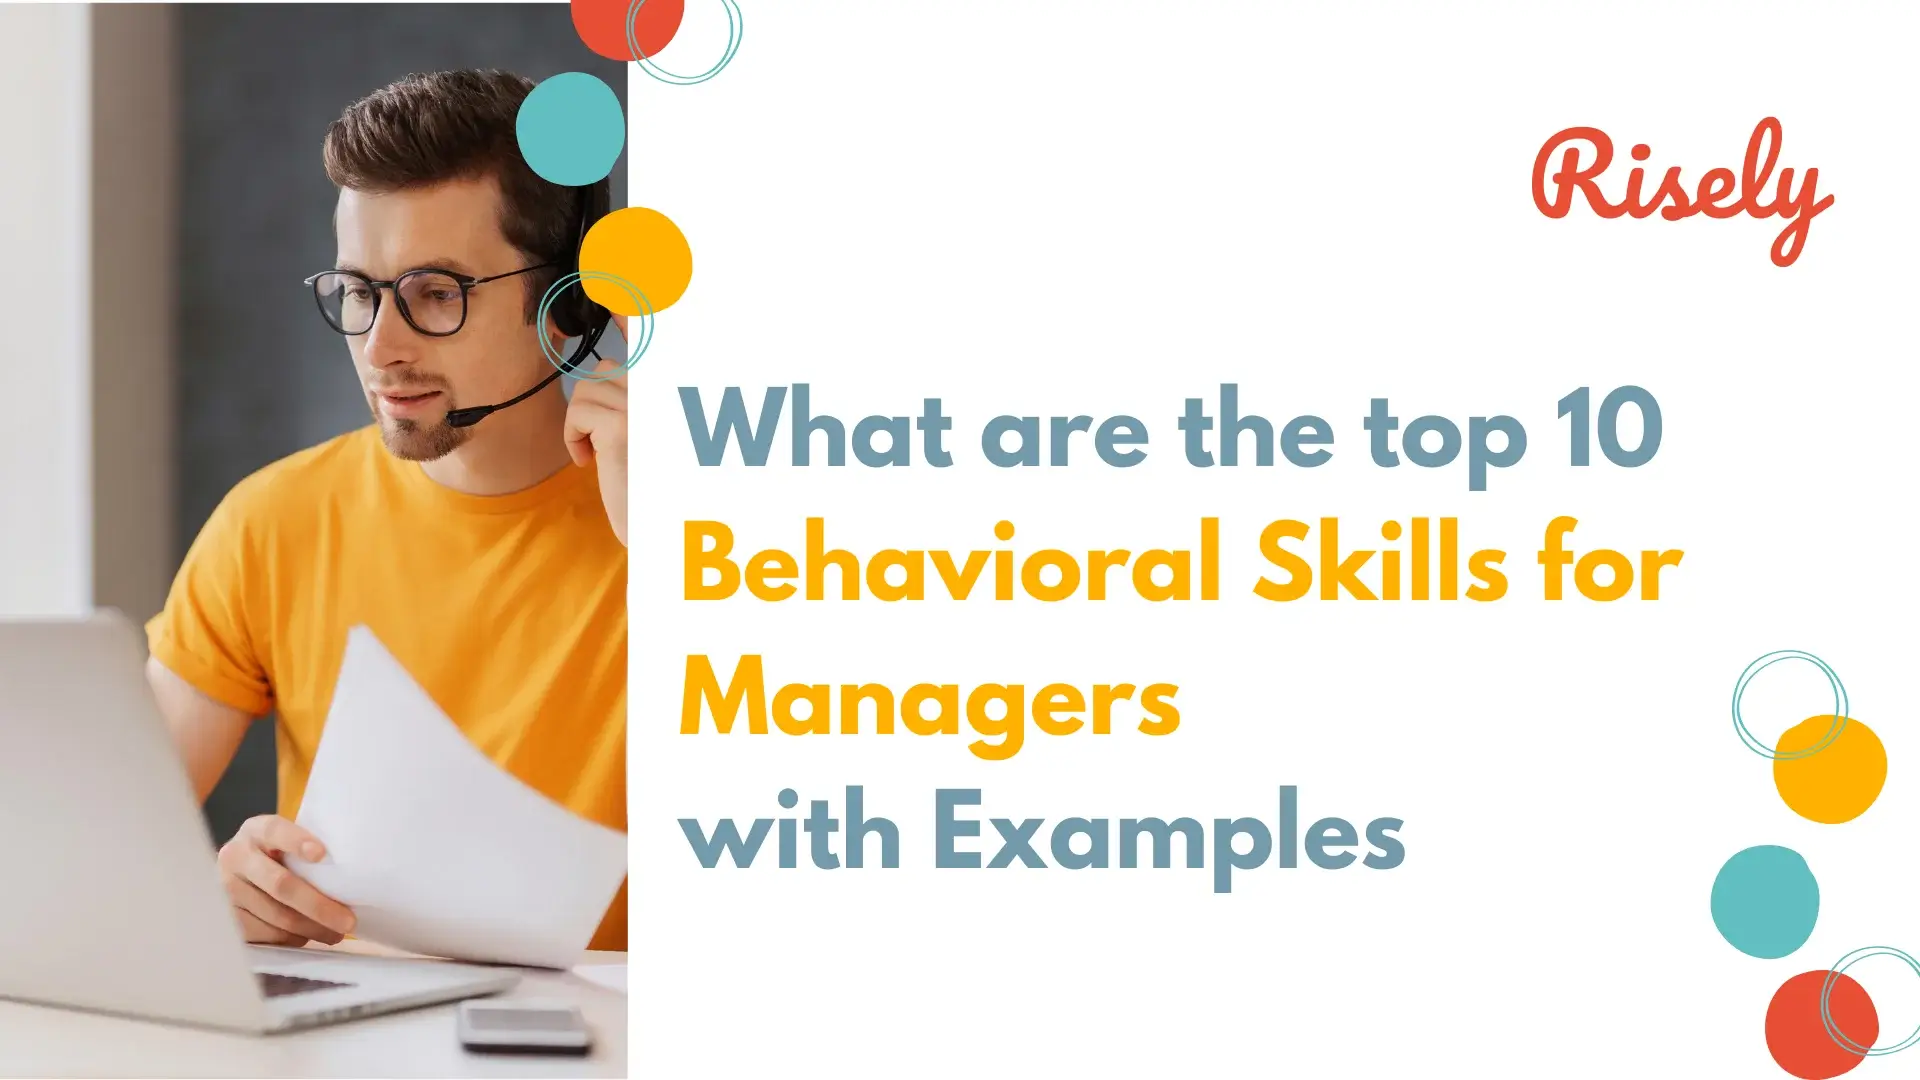 What are the top 10 Behavioral Skills for Managers? with Examples